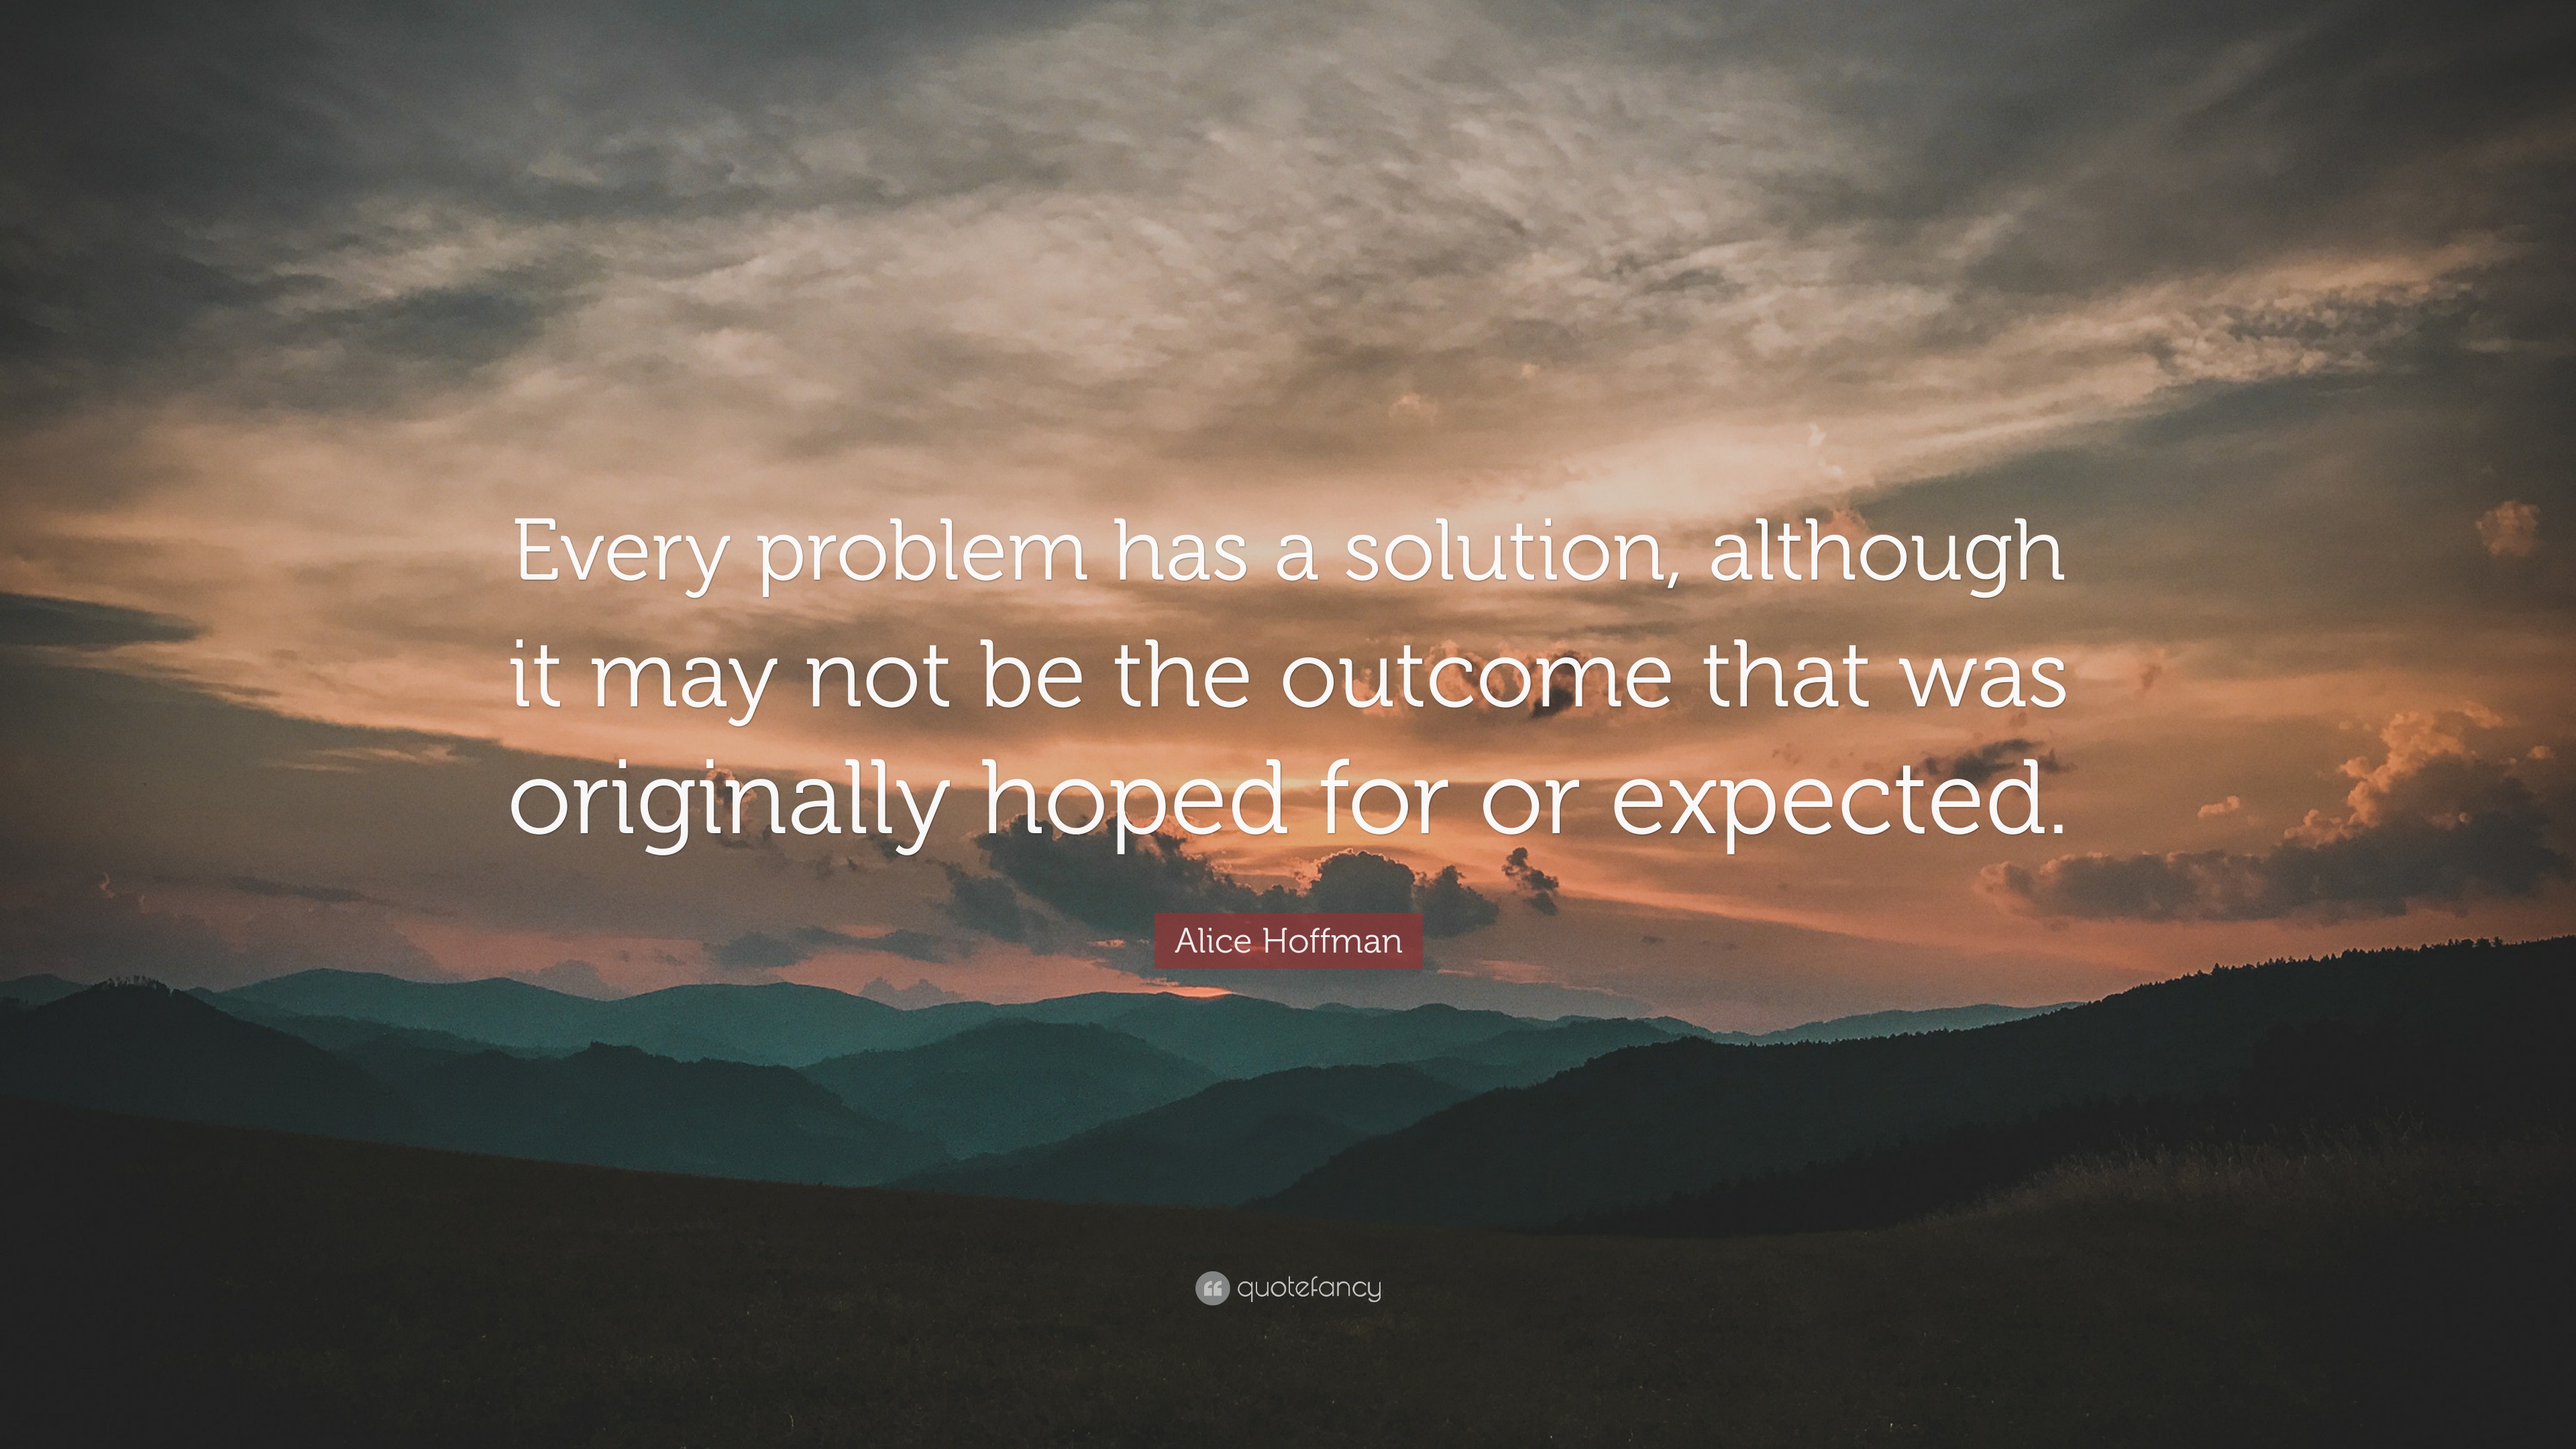 Alice Hoffman Quote: “Every problem has a solution, although it may not